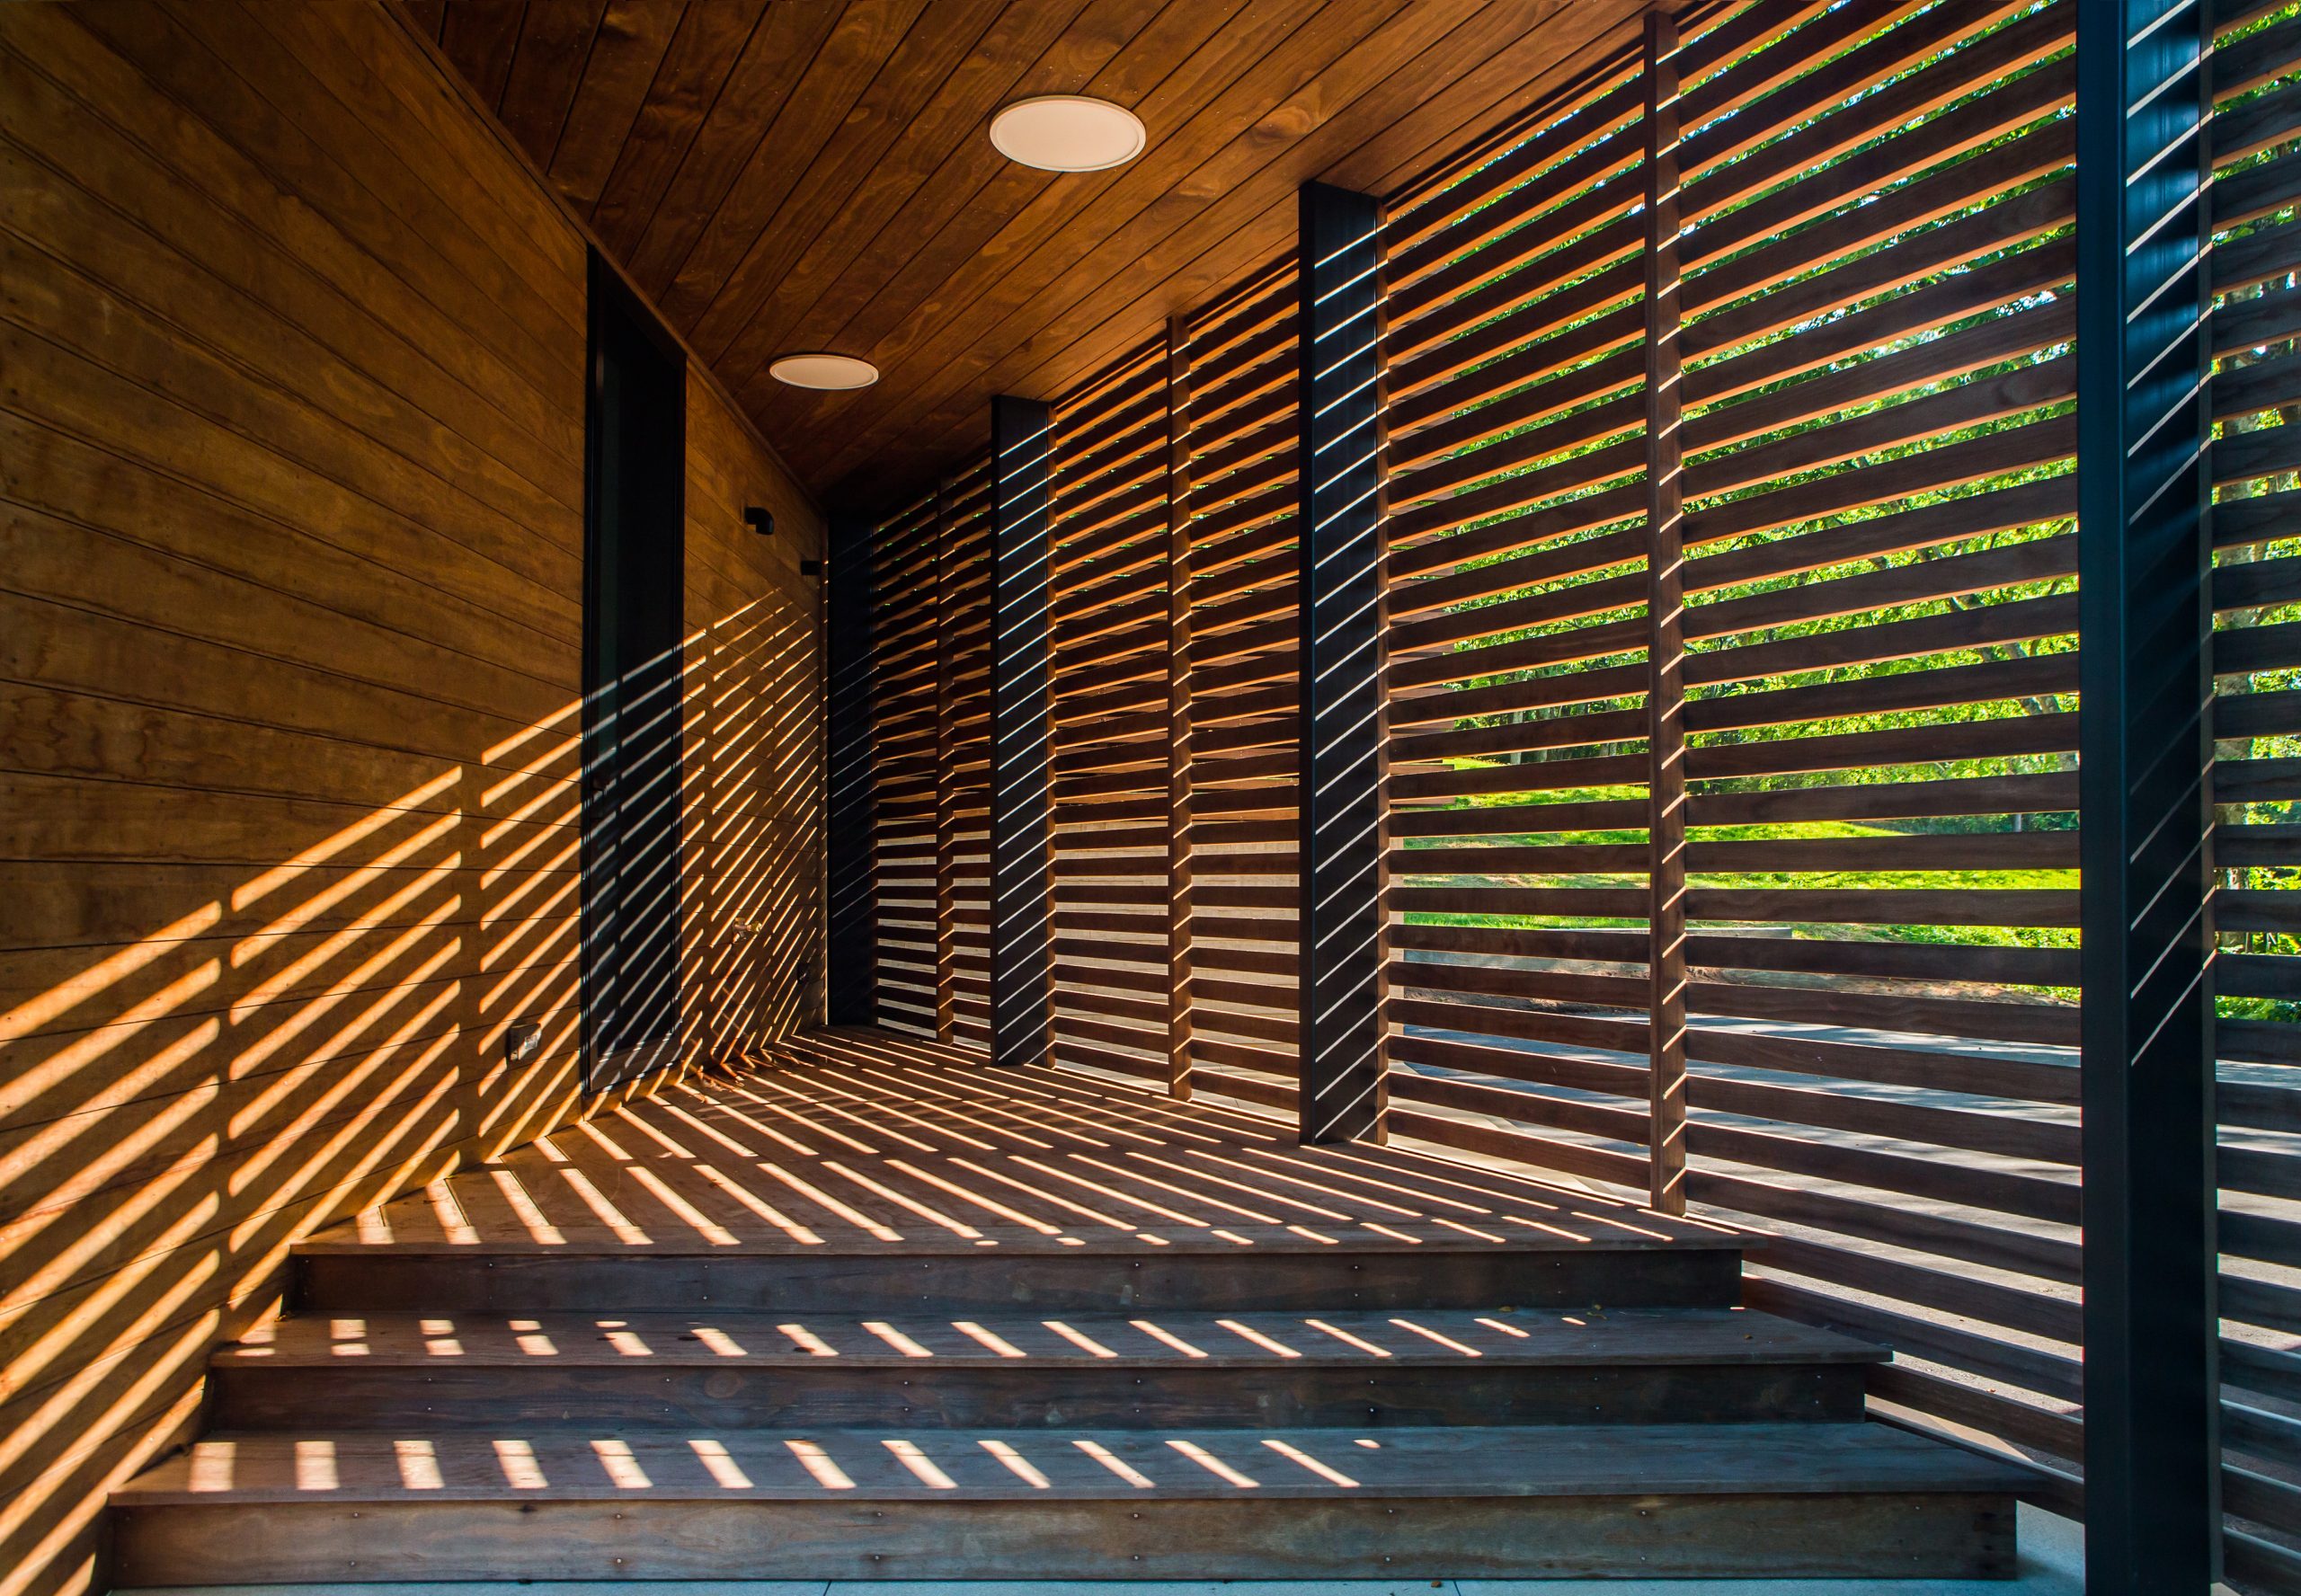 Interior view of the sun shining through the wooden slats of the Wood Screen House in Nashville, Tennessee during a sunny day featuring Kebony Modified Wood Clear Cladding